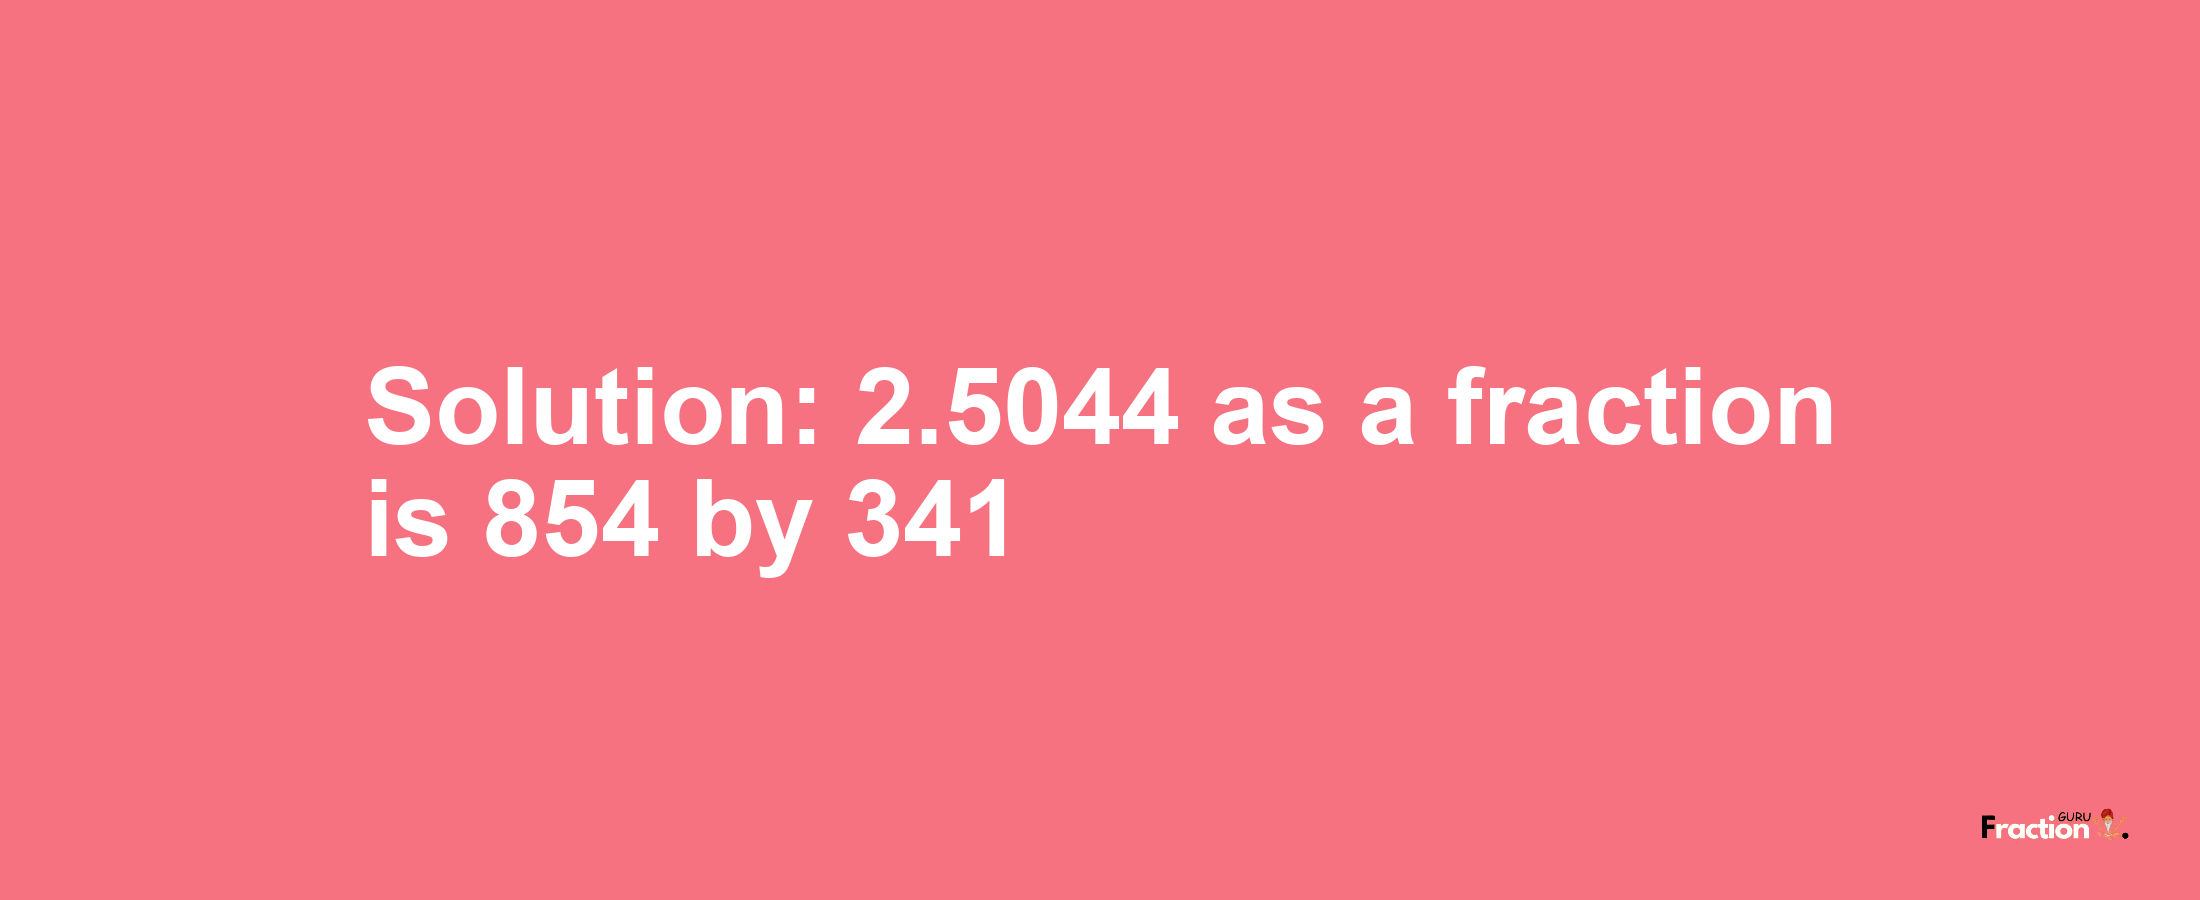 Solution:2.5044 as a fraction is 854/341